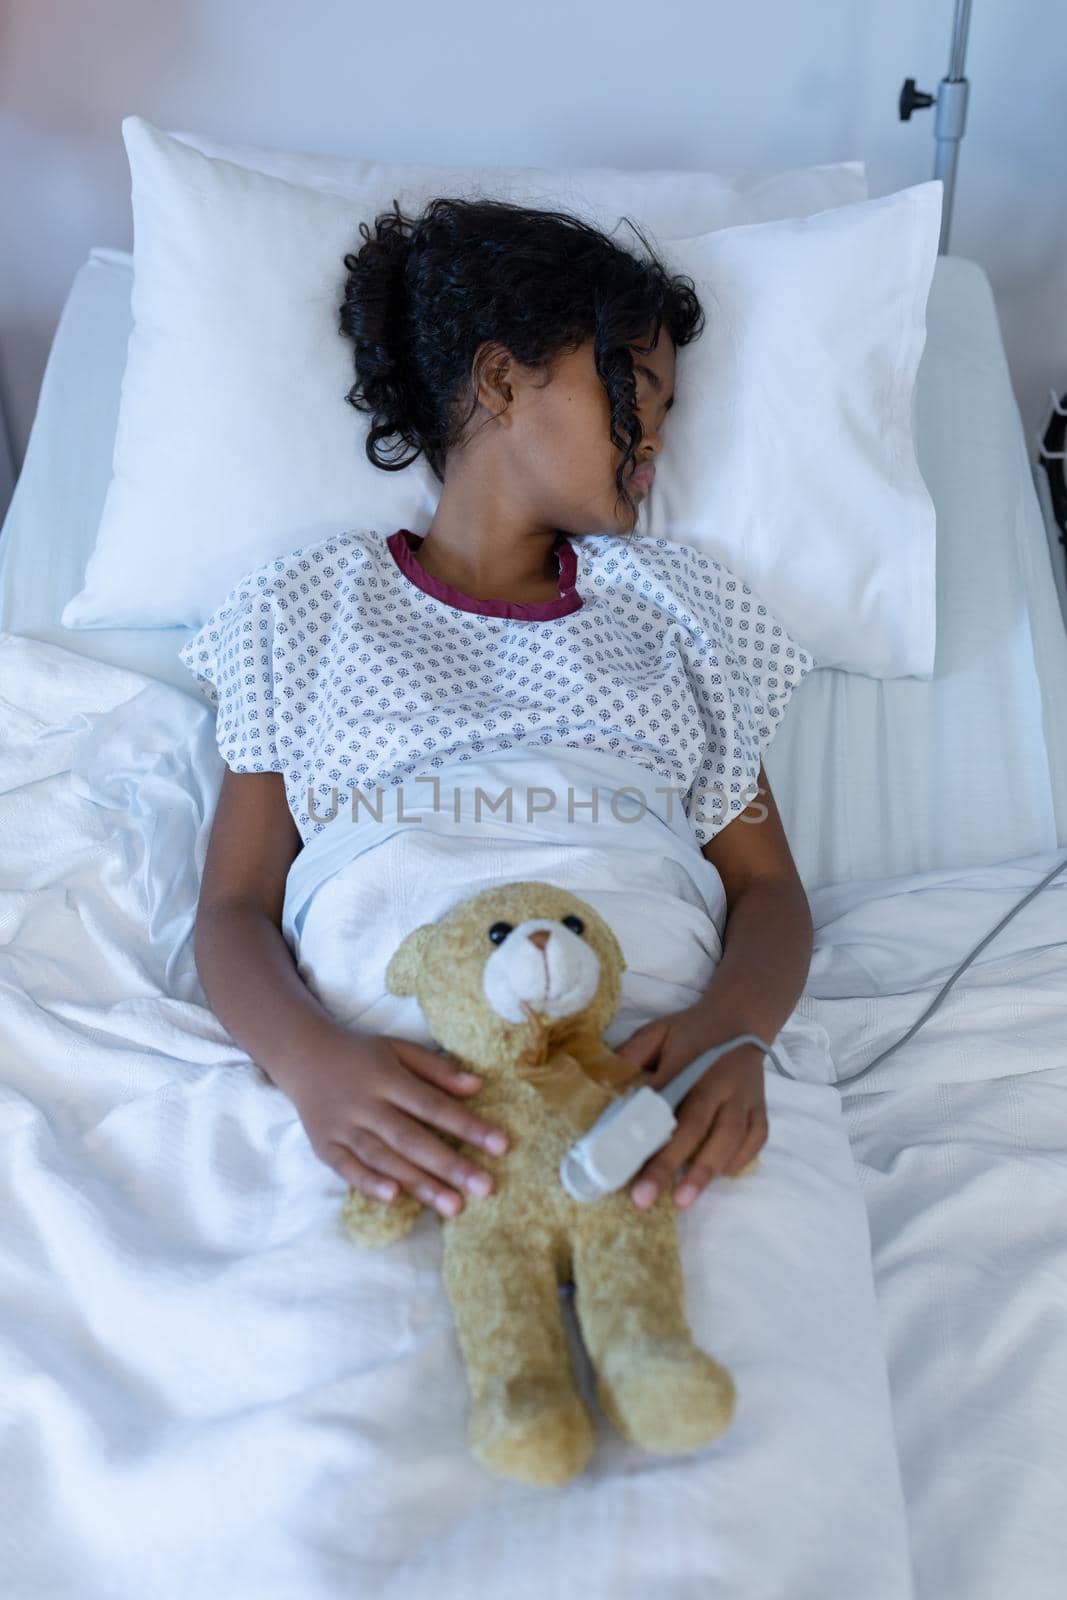 Sick mixed race girl asleep in hospital bed wearing fingertip pulse oximeter and holding teddy bear by Wavebreakmedia